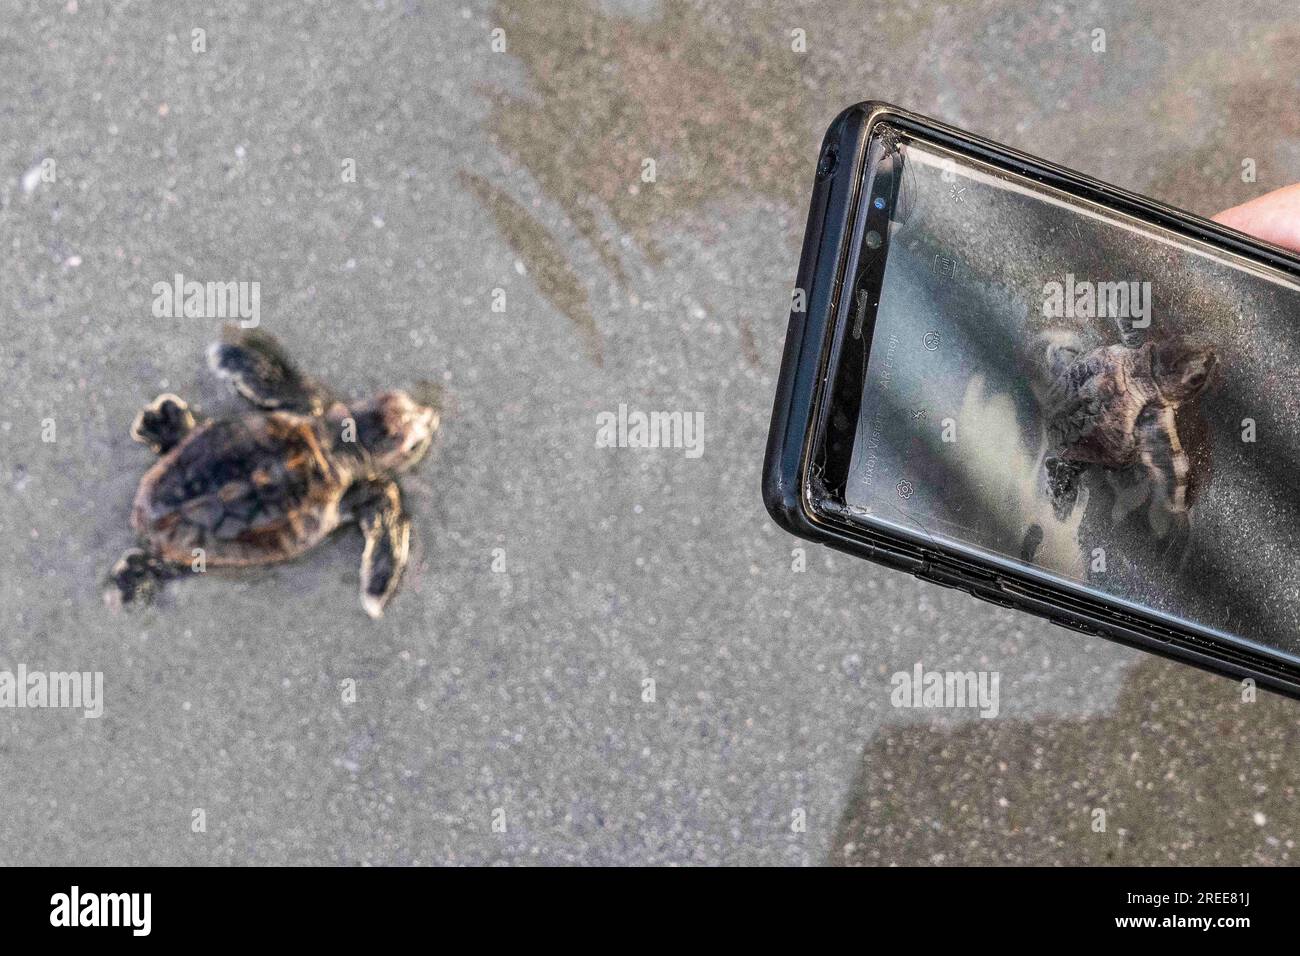 Isle of Palms, United States of America. 27 July, 2023. Tourists take mobile phone photos of an endangered loggerhead sea turtle hatchling, as it crawls to the Atlantic Ocean, July 27, 2023 in Isle of Palms, South Carolina. Sea turtles can live to 100-years-old, but less than 3% of hatchlings make it to adulthood. Credit: Richard Ellis/Richard Ellis/Alamy Live News Stock Photo